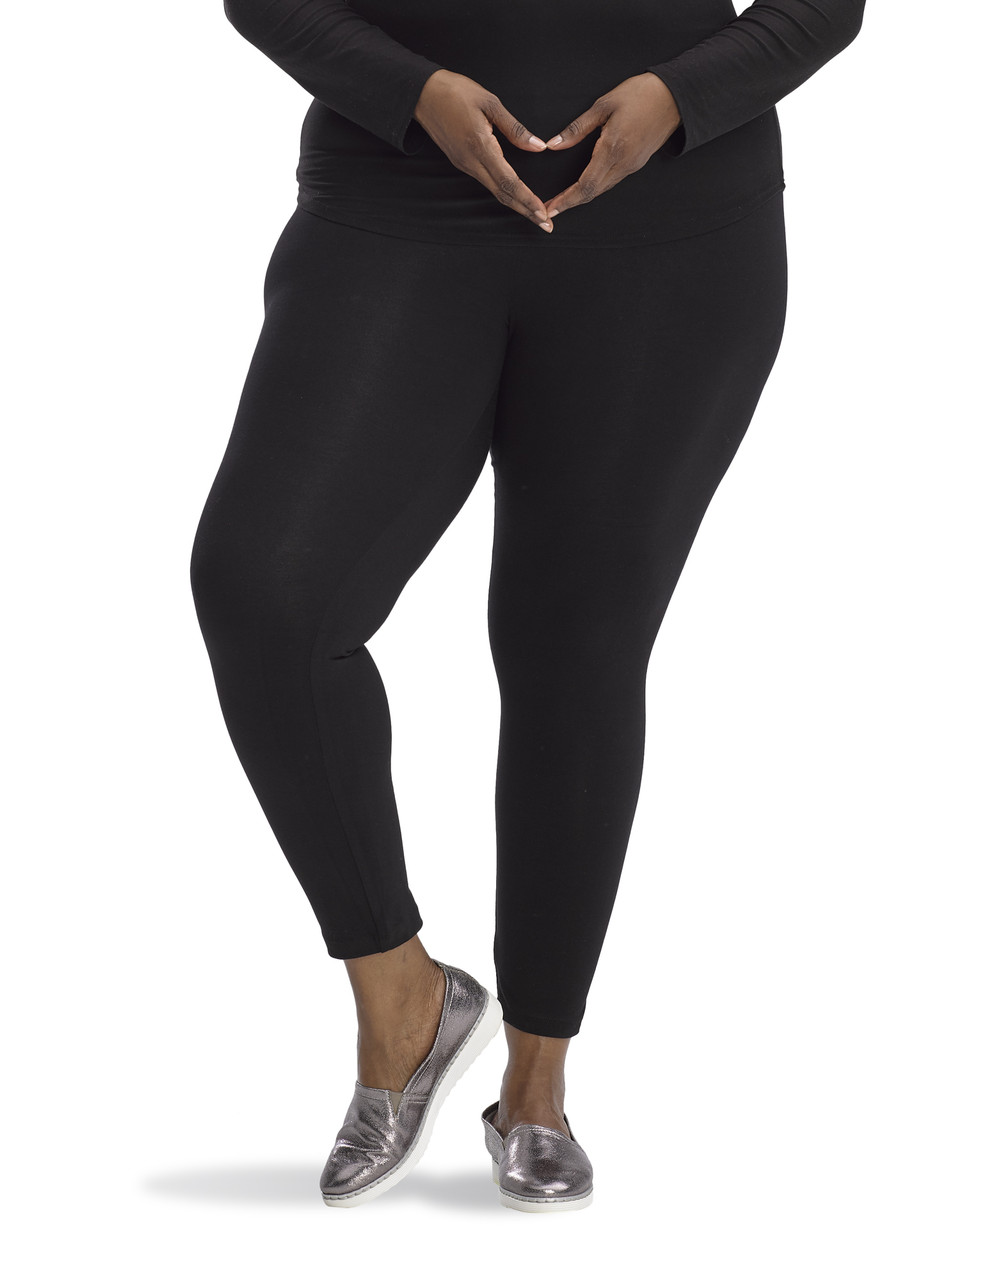  Leggings for Women Knot Wide Waistband Solid Leggings Leggings  for Women (Color : Black, Size : X-Small) : Clothing, Shoes & Jewelry